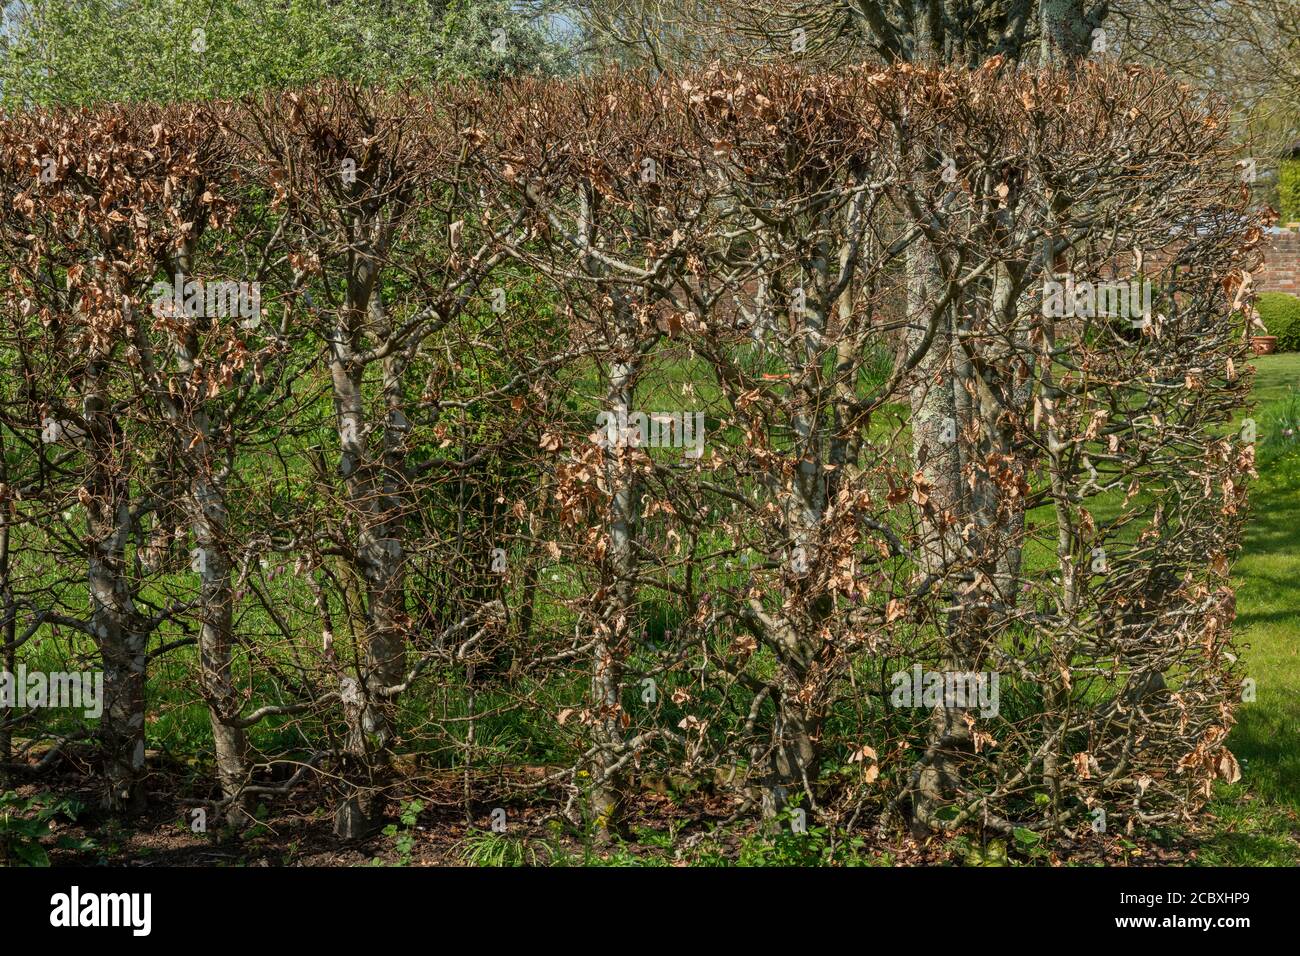 Beech hedge with leaves, juvenile foliage, retained, through the winter. Stock Photo